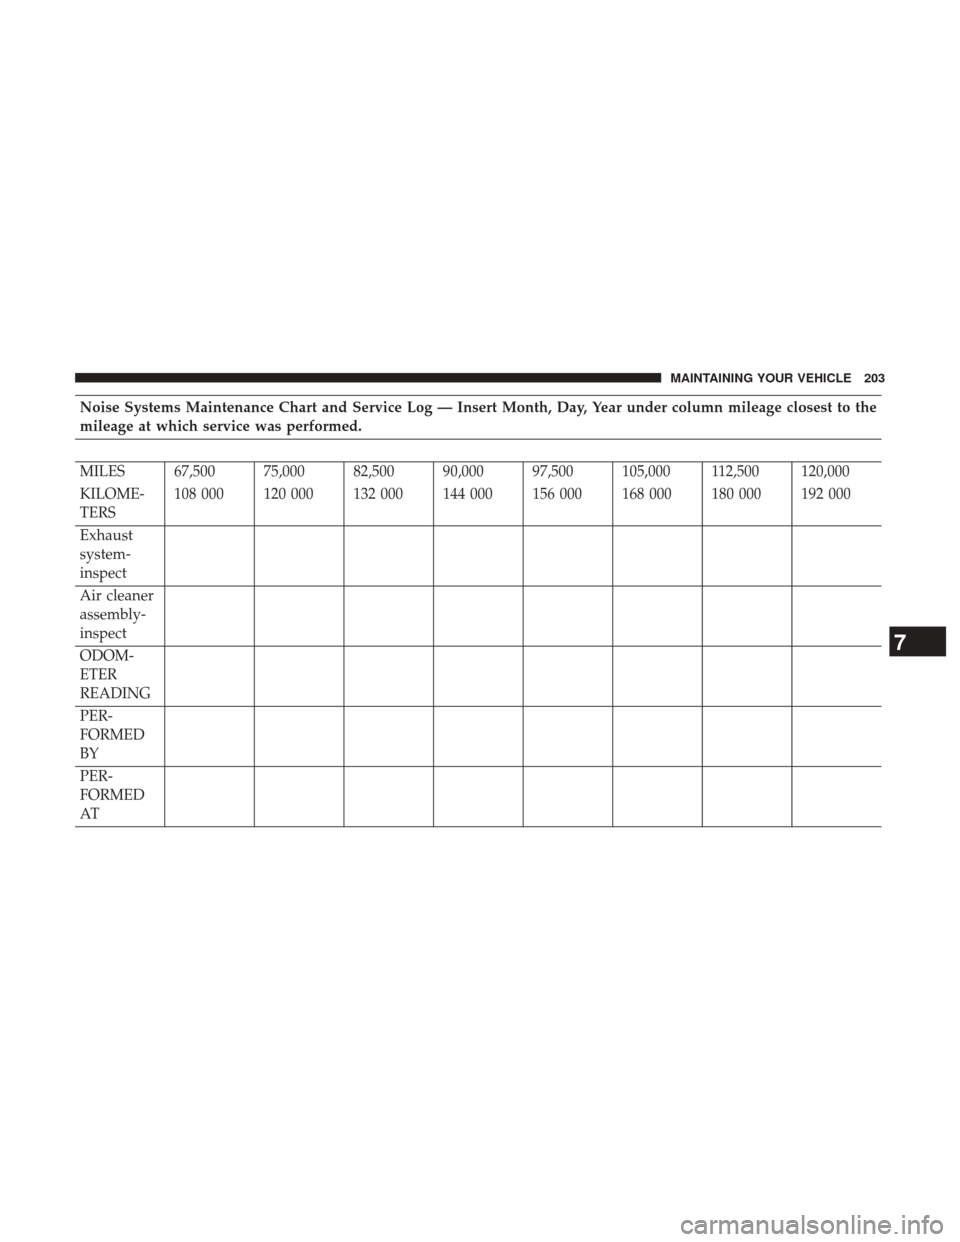 Ram 3500 2017  Diesel Supplement Noise Systems Maintenance Chart and Service Log — Insert Month, Day, Year under column mileage closest to the
mileage at which service was performed.
MILES 67,500 75,000 82,500 90,000 97,500 105,000